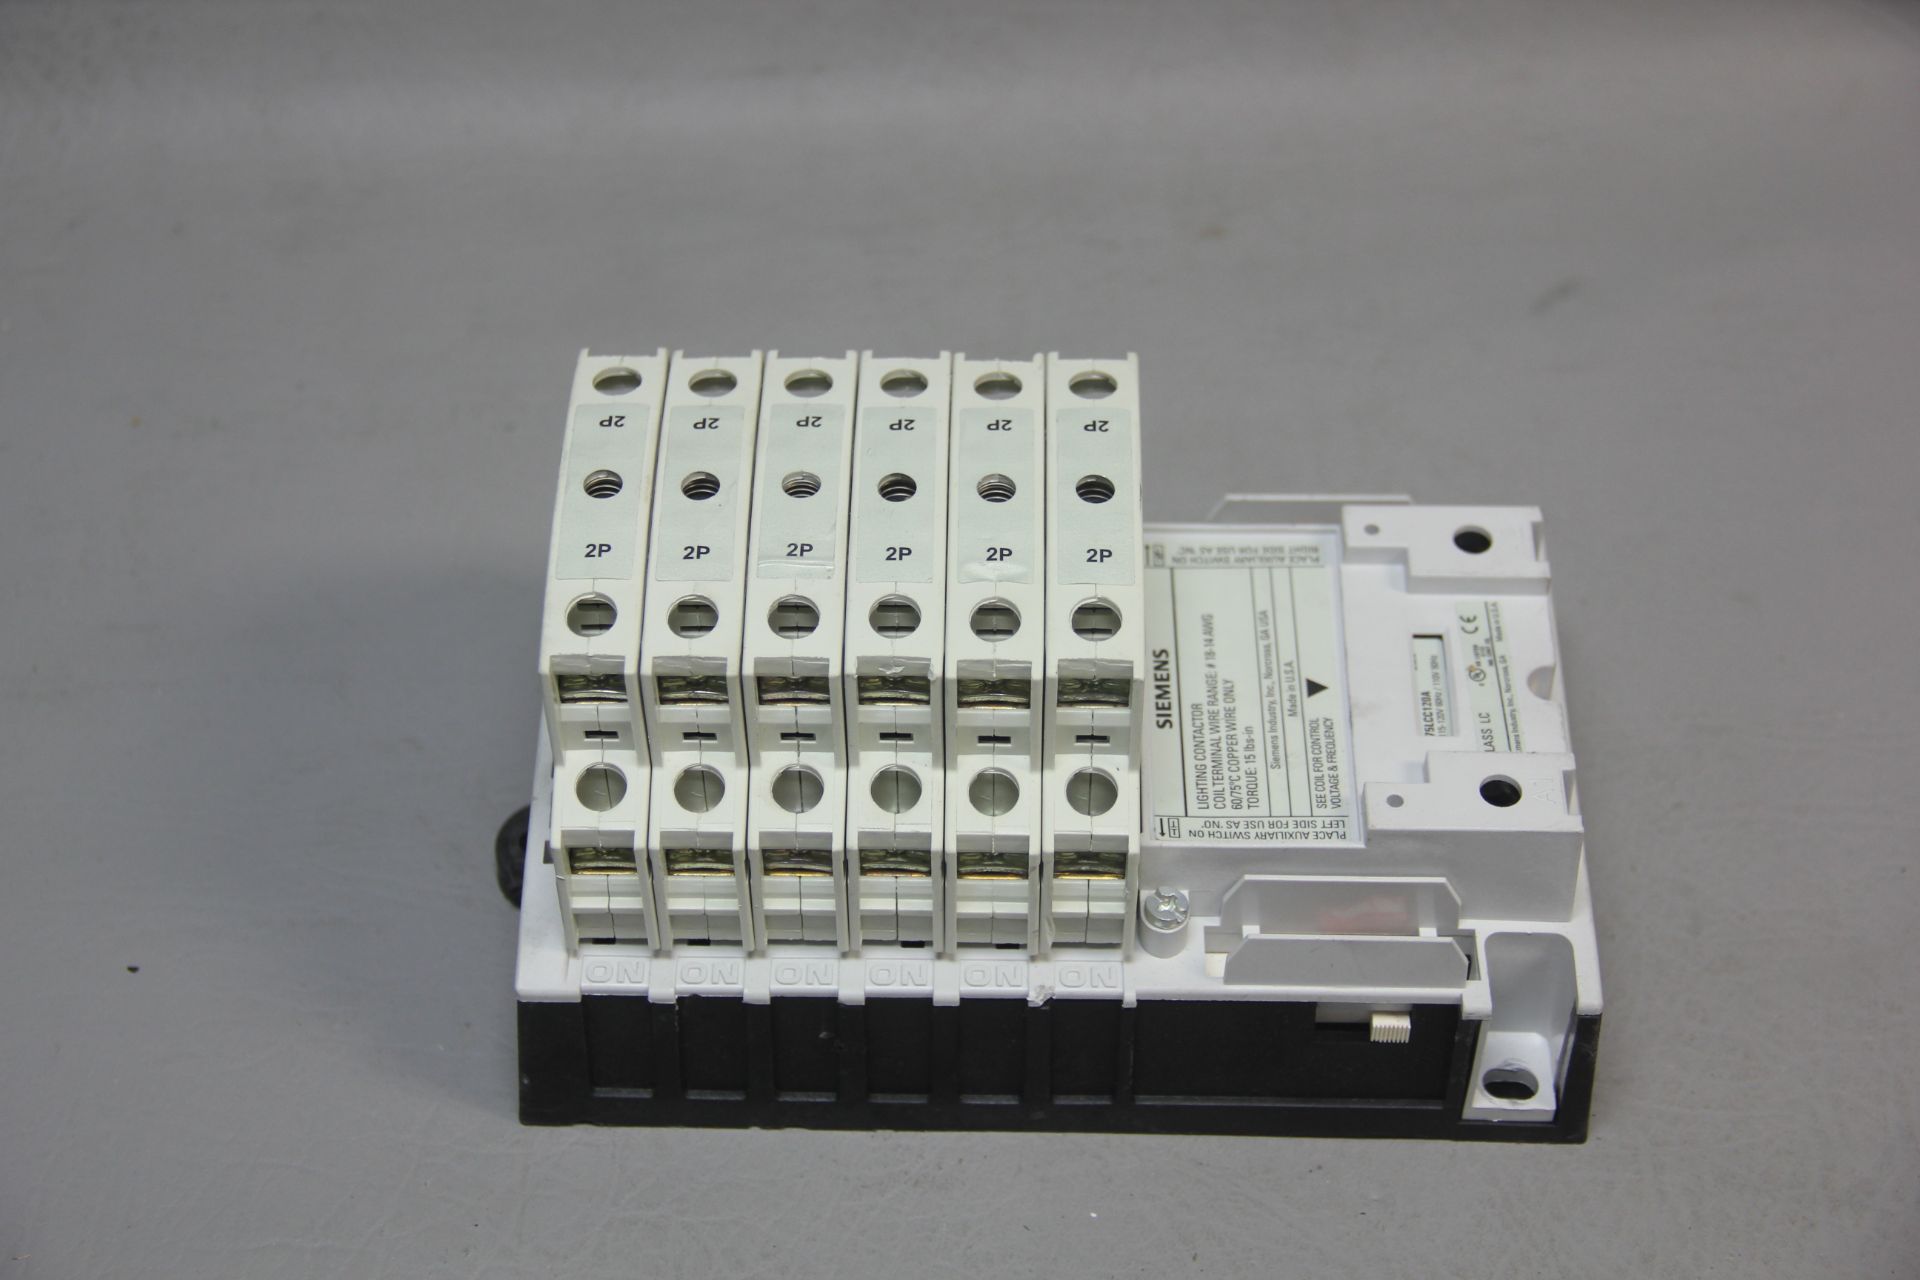 SIEMENS LIGHTING CONTACTOR WITH 6 MODULES - Image 5 of 5